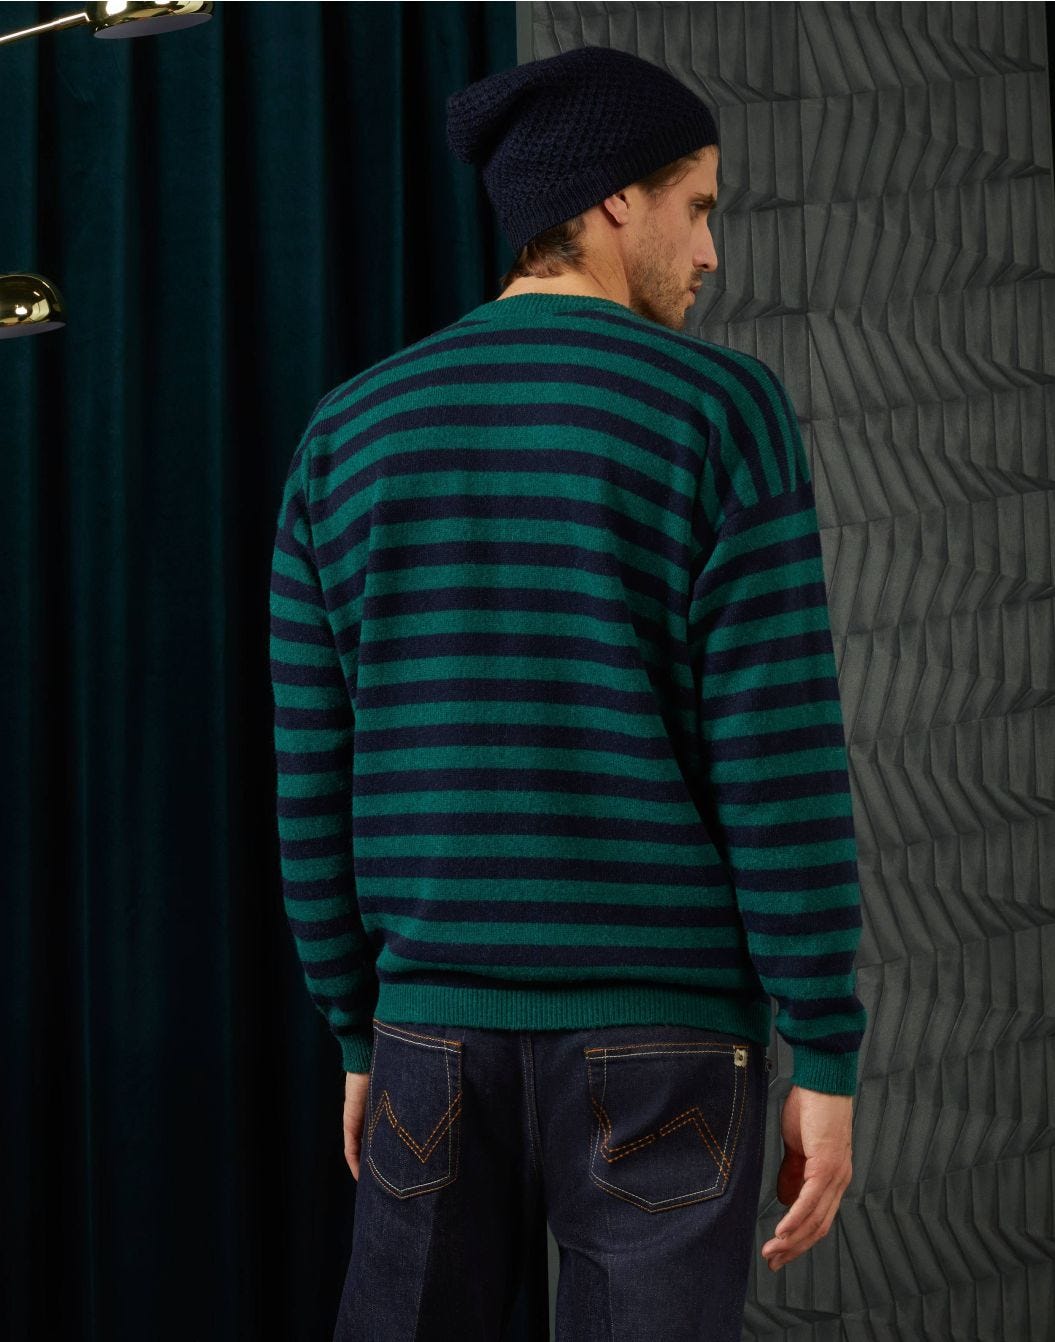 Round-neck wool-and-Alpaca sweater in green-and-blue stripes